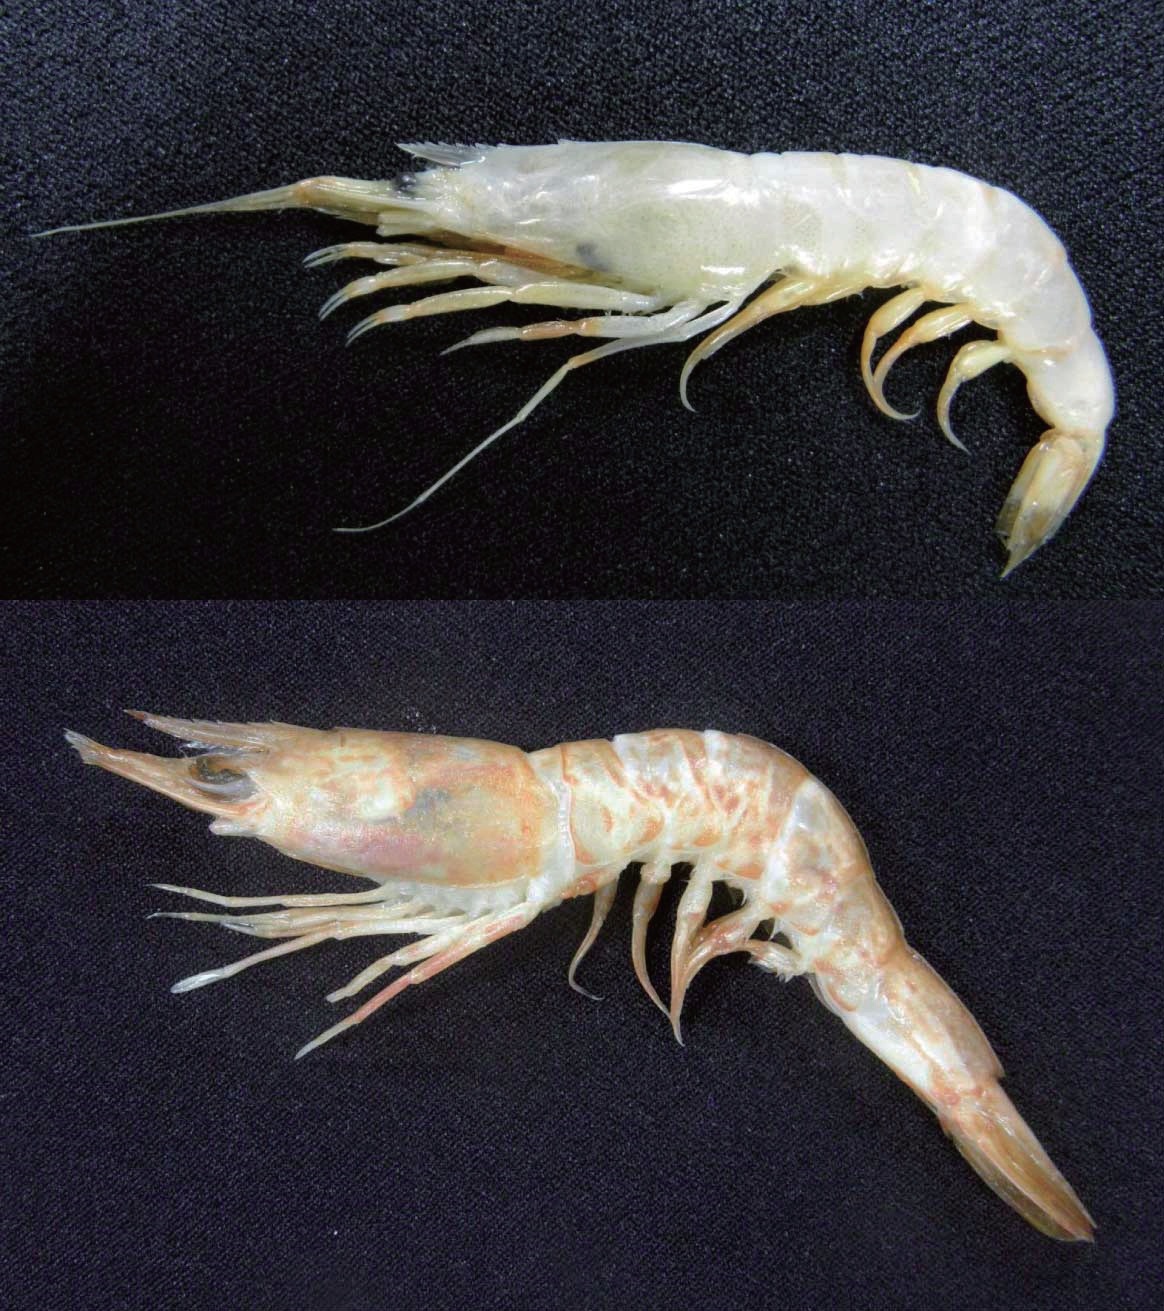 Two penaeid shrimps from southern coast of Korea. (A) Atypopenaeus
stenodactylus (Stimpson, 1860), female (carapace length 15.7
mm) from off Sacheon. (B) Metapenaeopsis toloensis Hall, 1962, female
(carapace length 22.2 mm) from off Dadaepo, Busan.